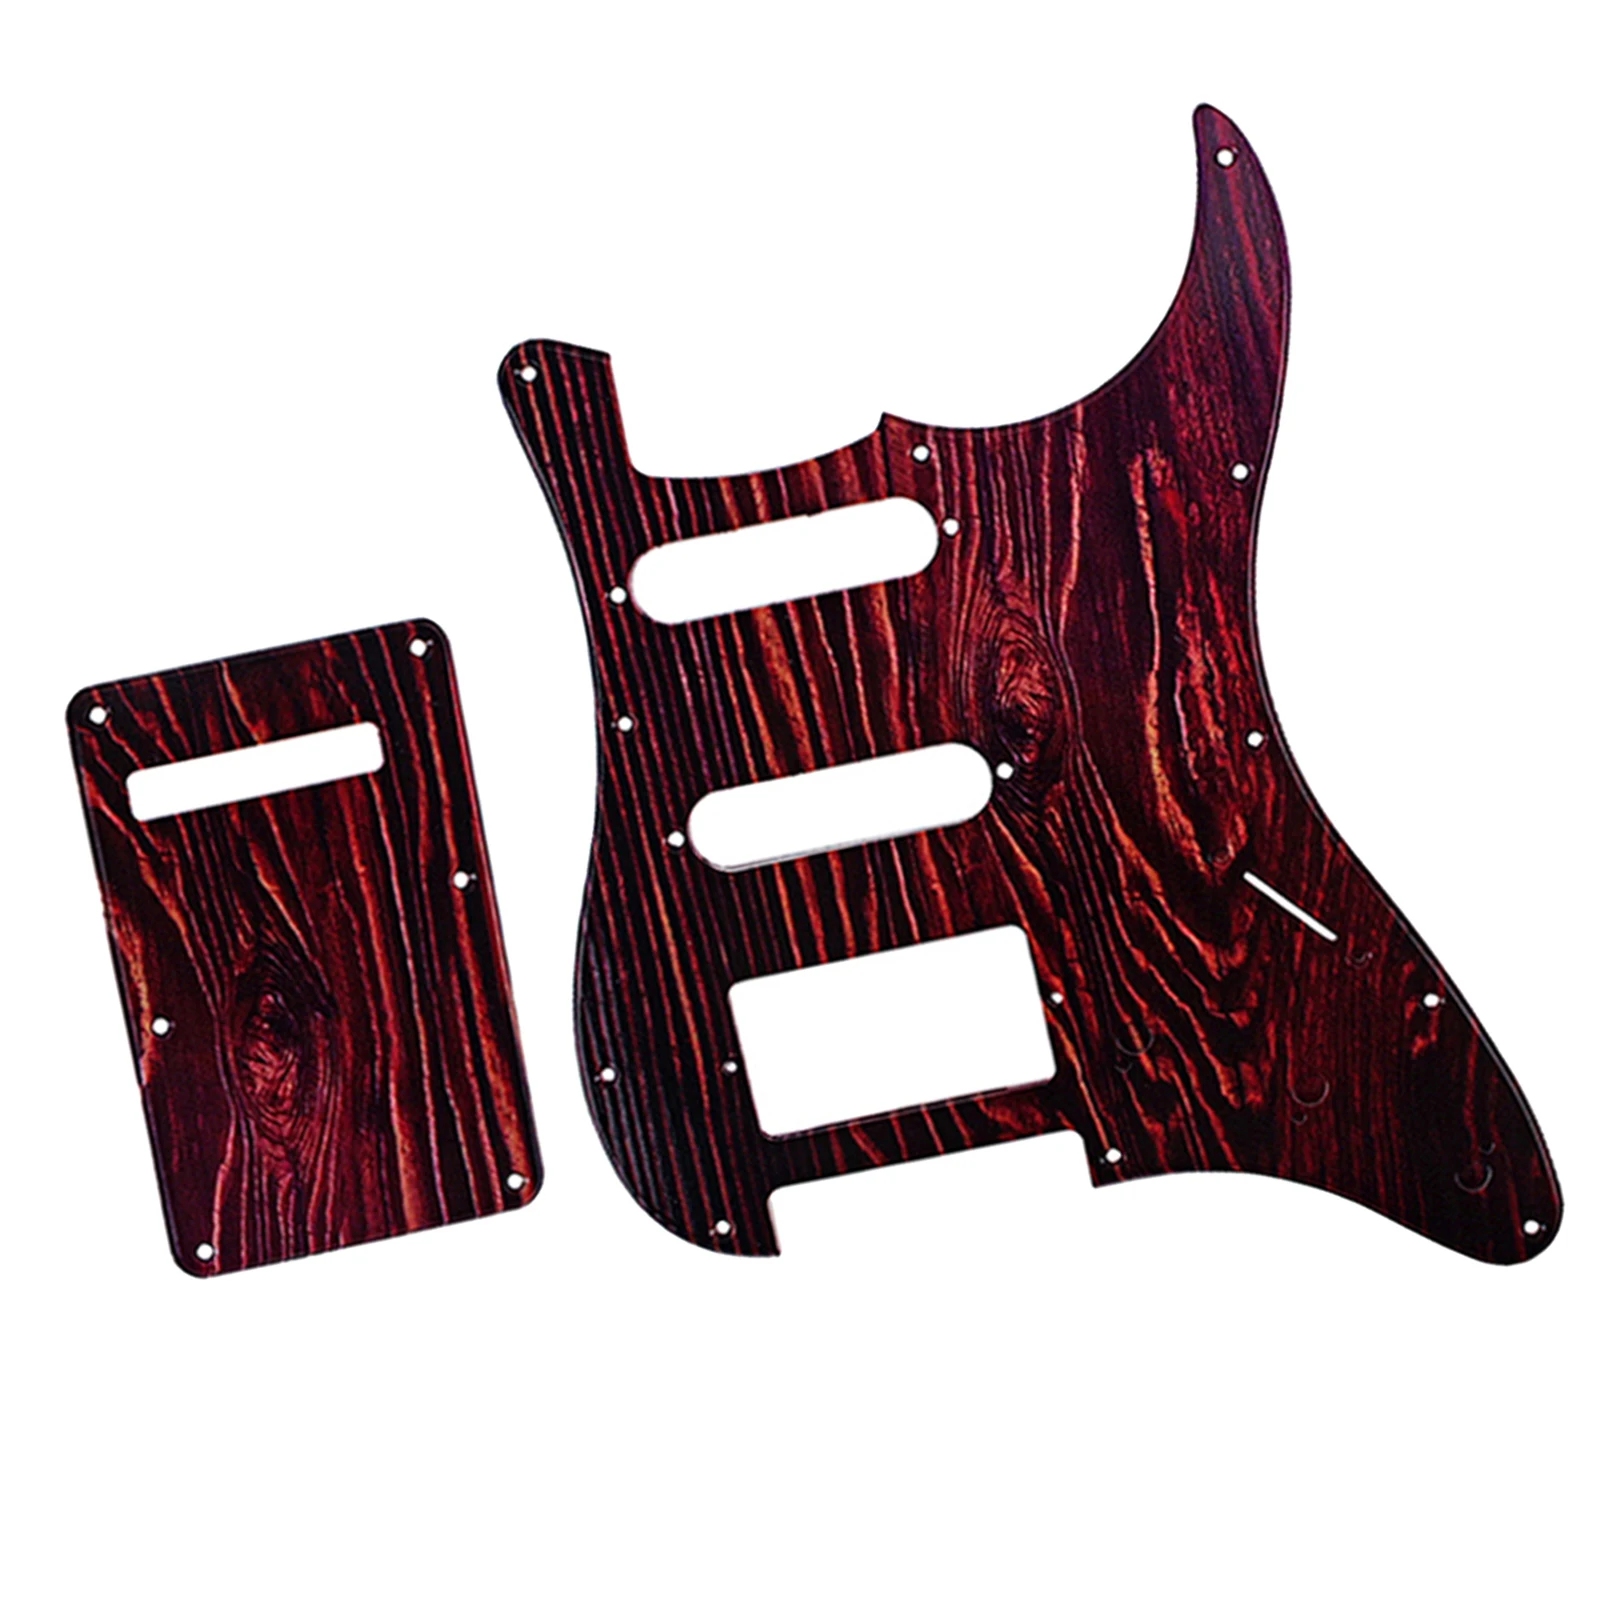 3 Ply Guitar Pickguard & Tremolo Cover for Yamaha  Parts Accessory